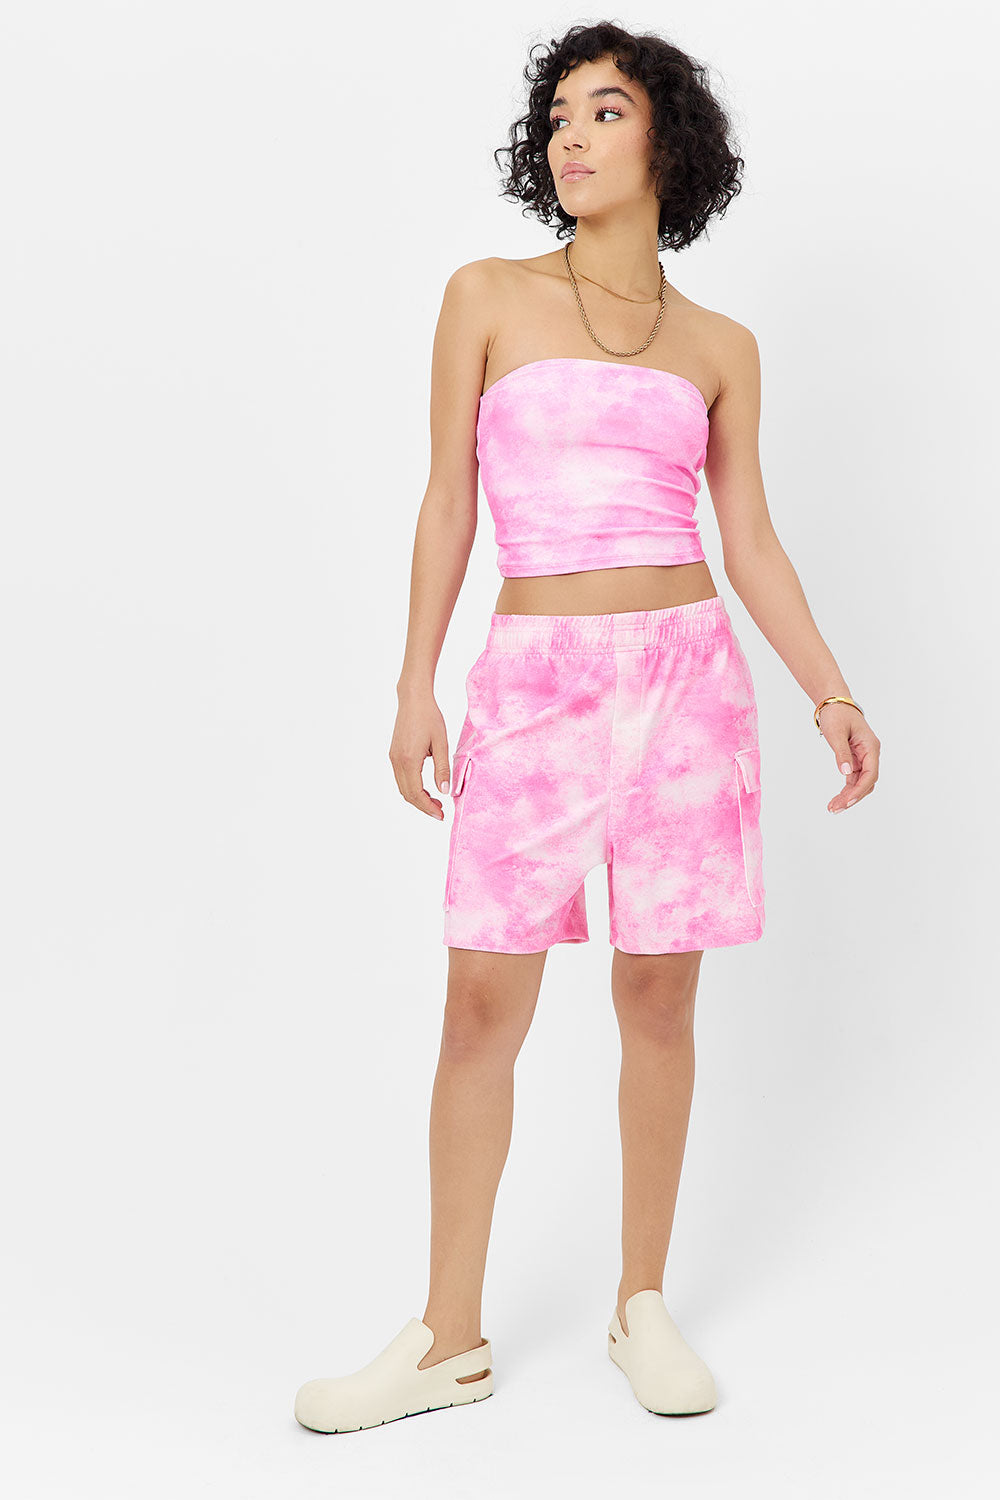 Harvey Terry Shorts - Distorted Pink Dye